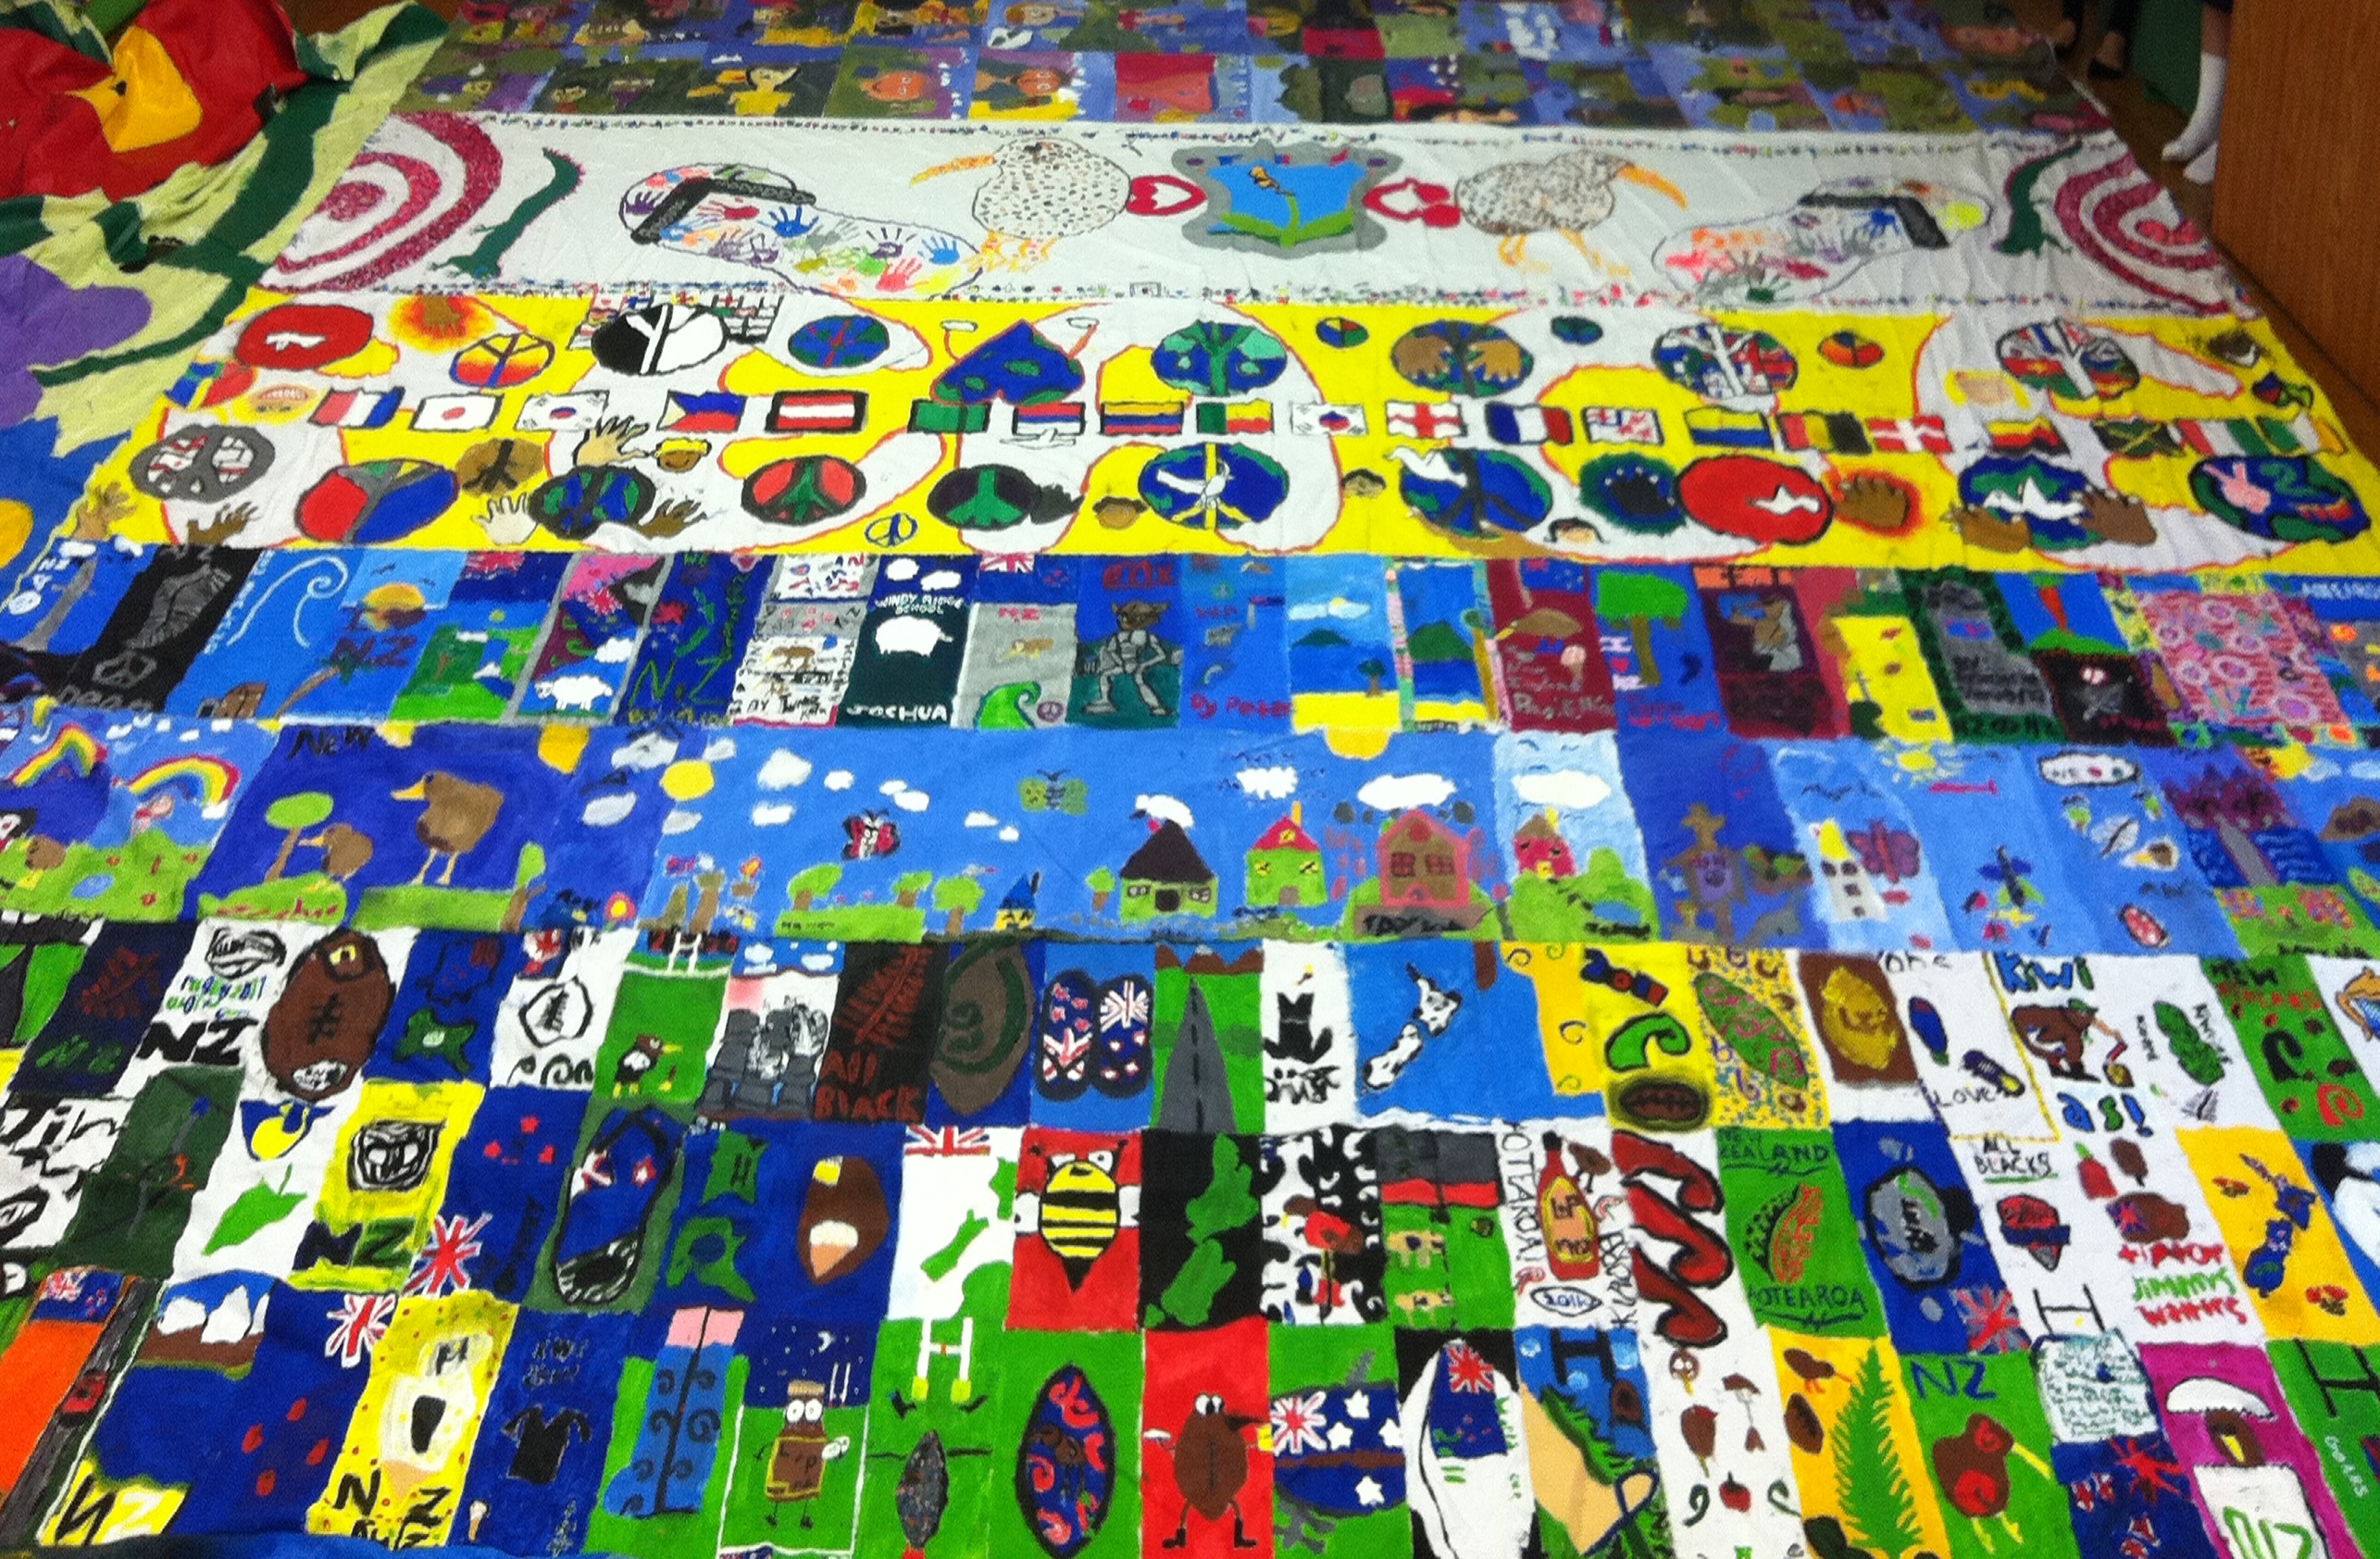 The cotton sheeting painted by the children of New Zealand has come back to us.